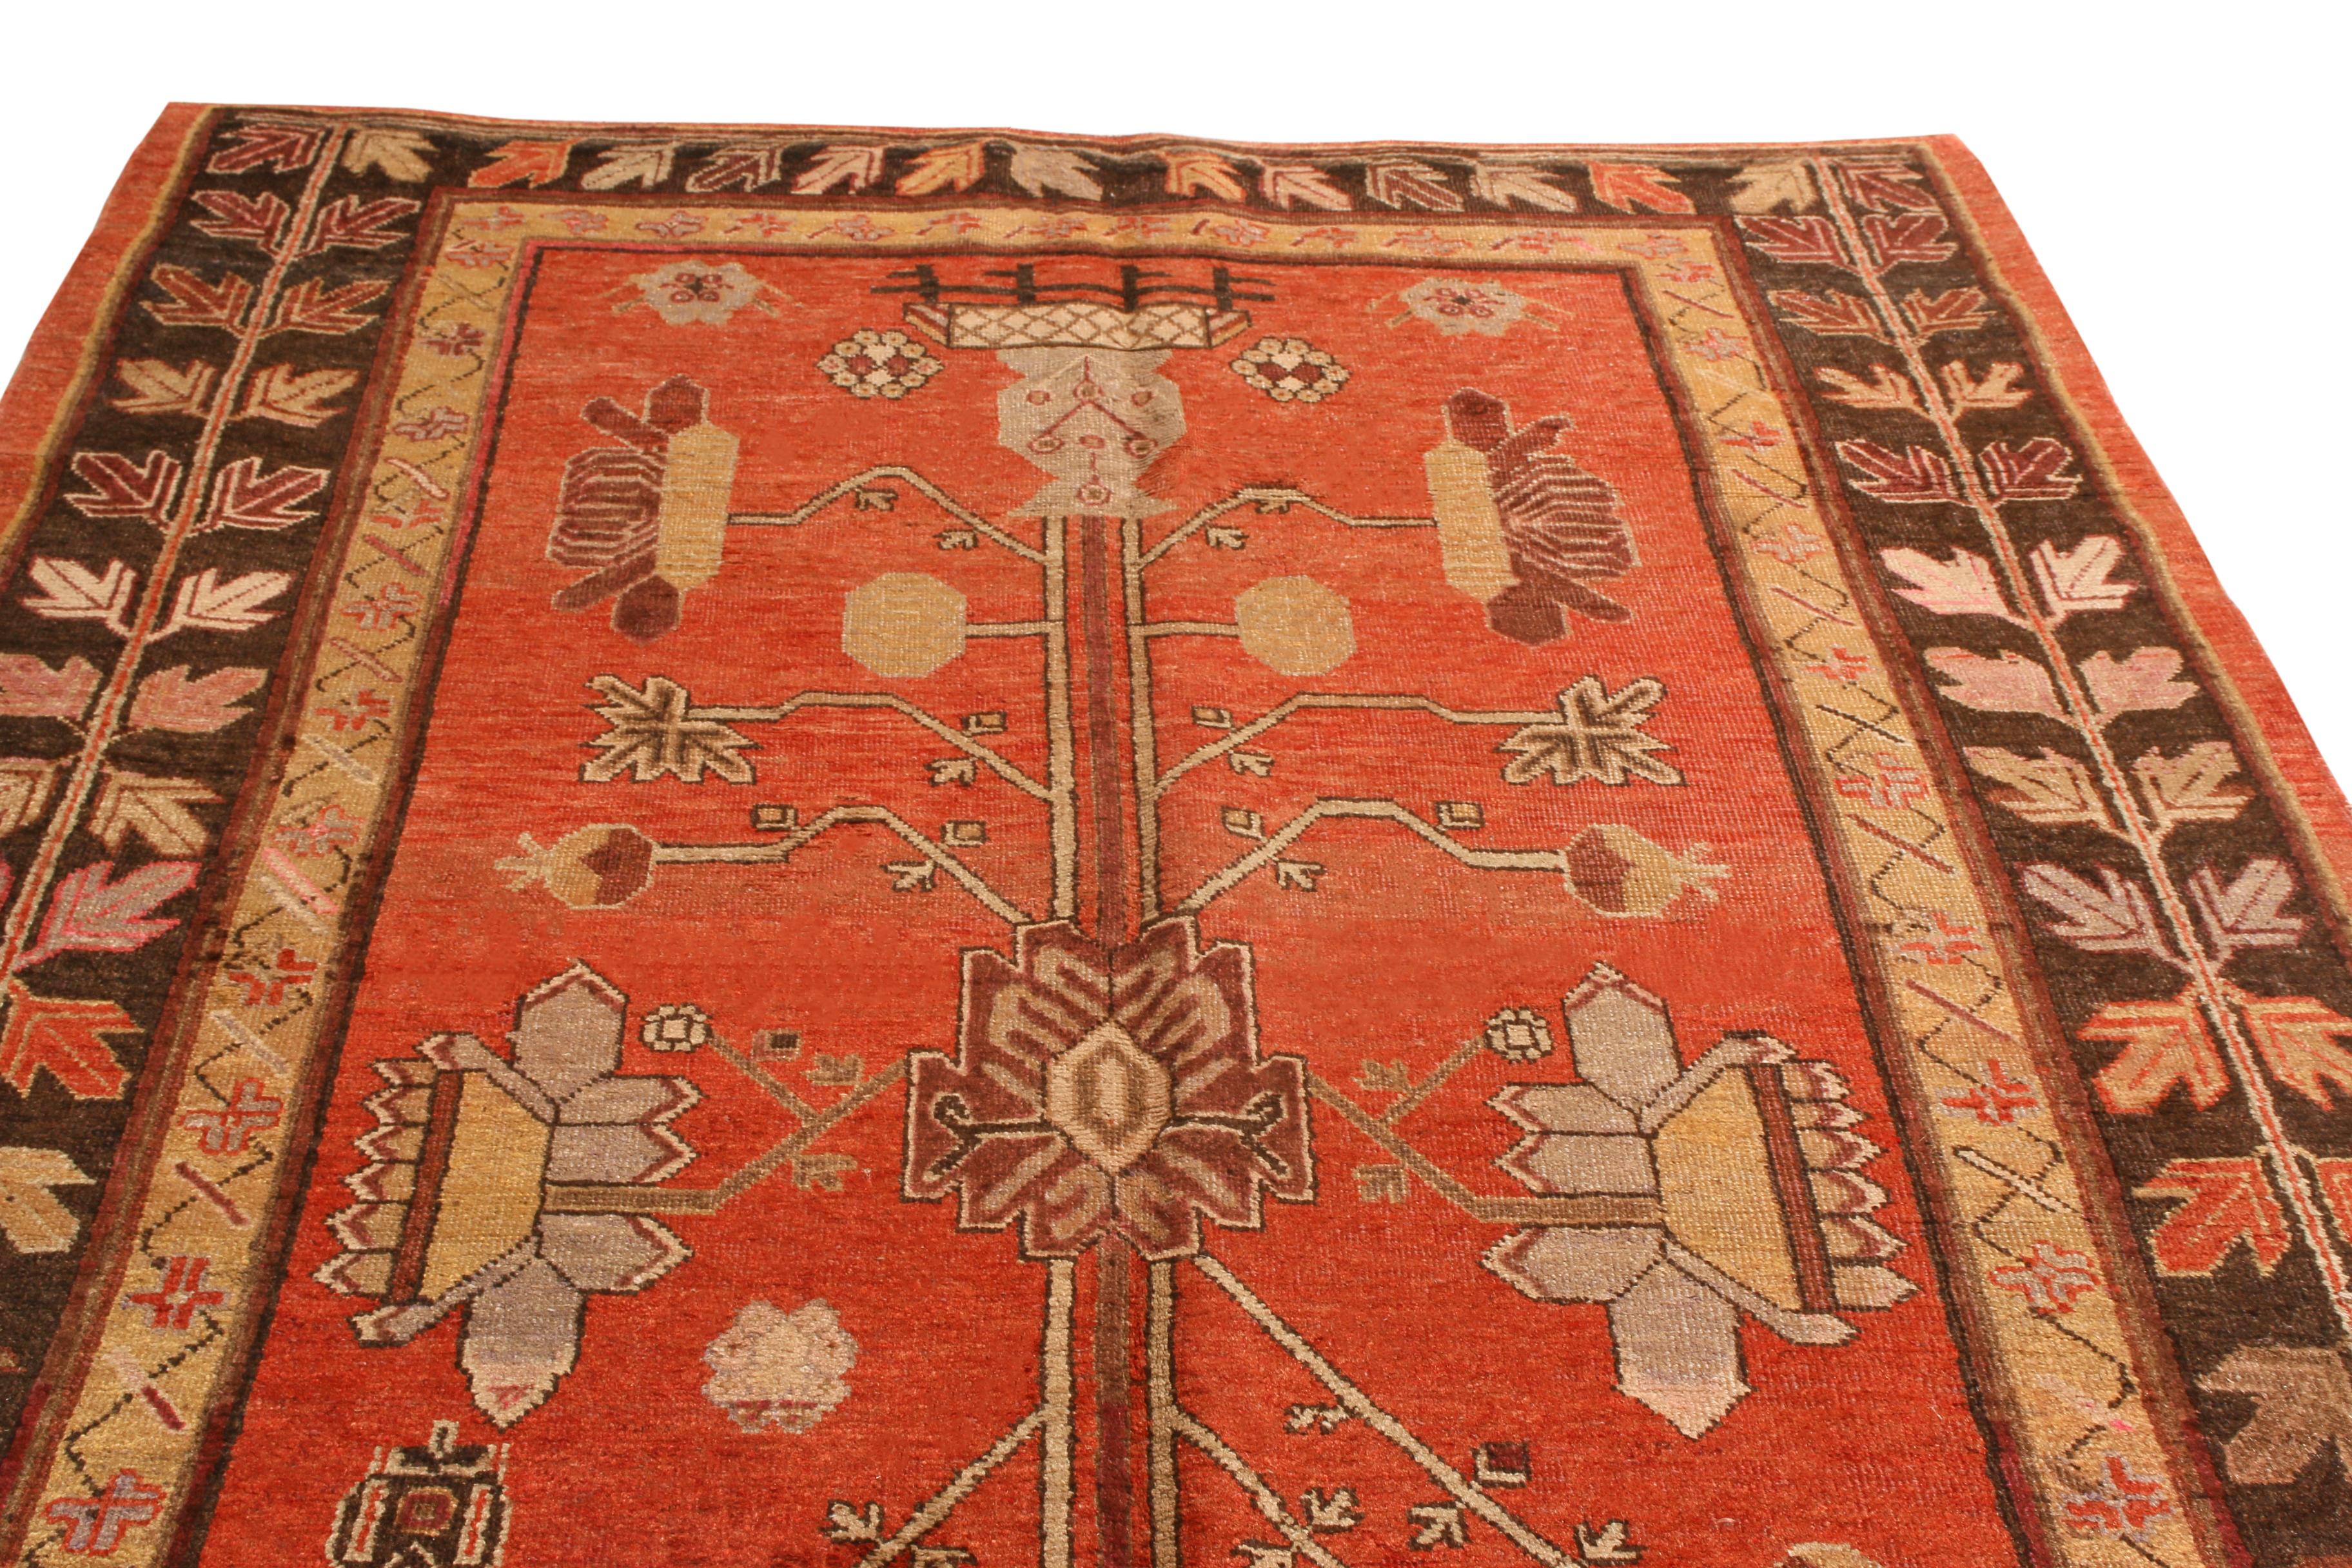 This antique transitional Khotan rug from Rug & Kilim originates between 1920-1940 from the city of Khotan within East Turkestan—a region known for individualistic and iconic cosmopolitan designs. Hand woven in high-quality wool, the all-over field